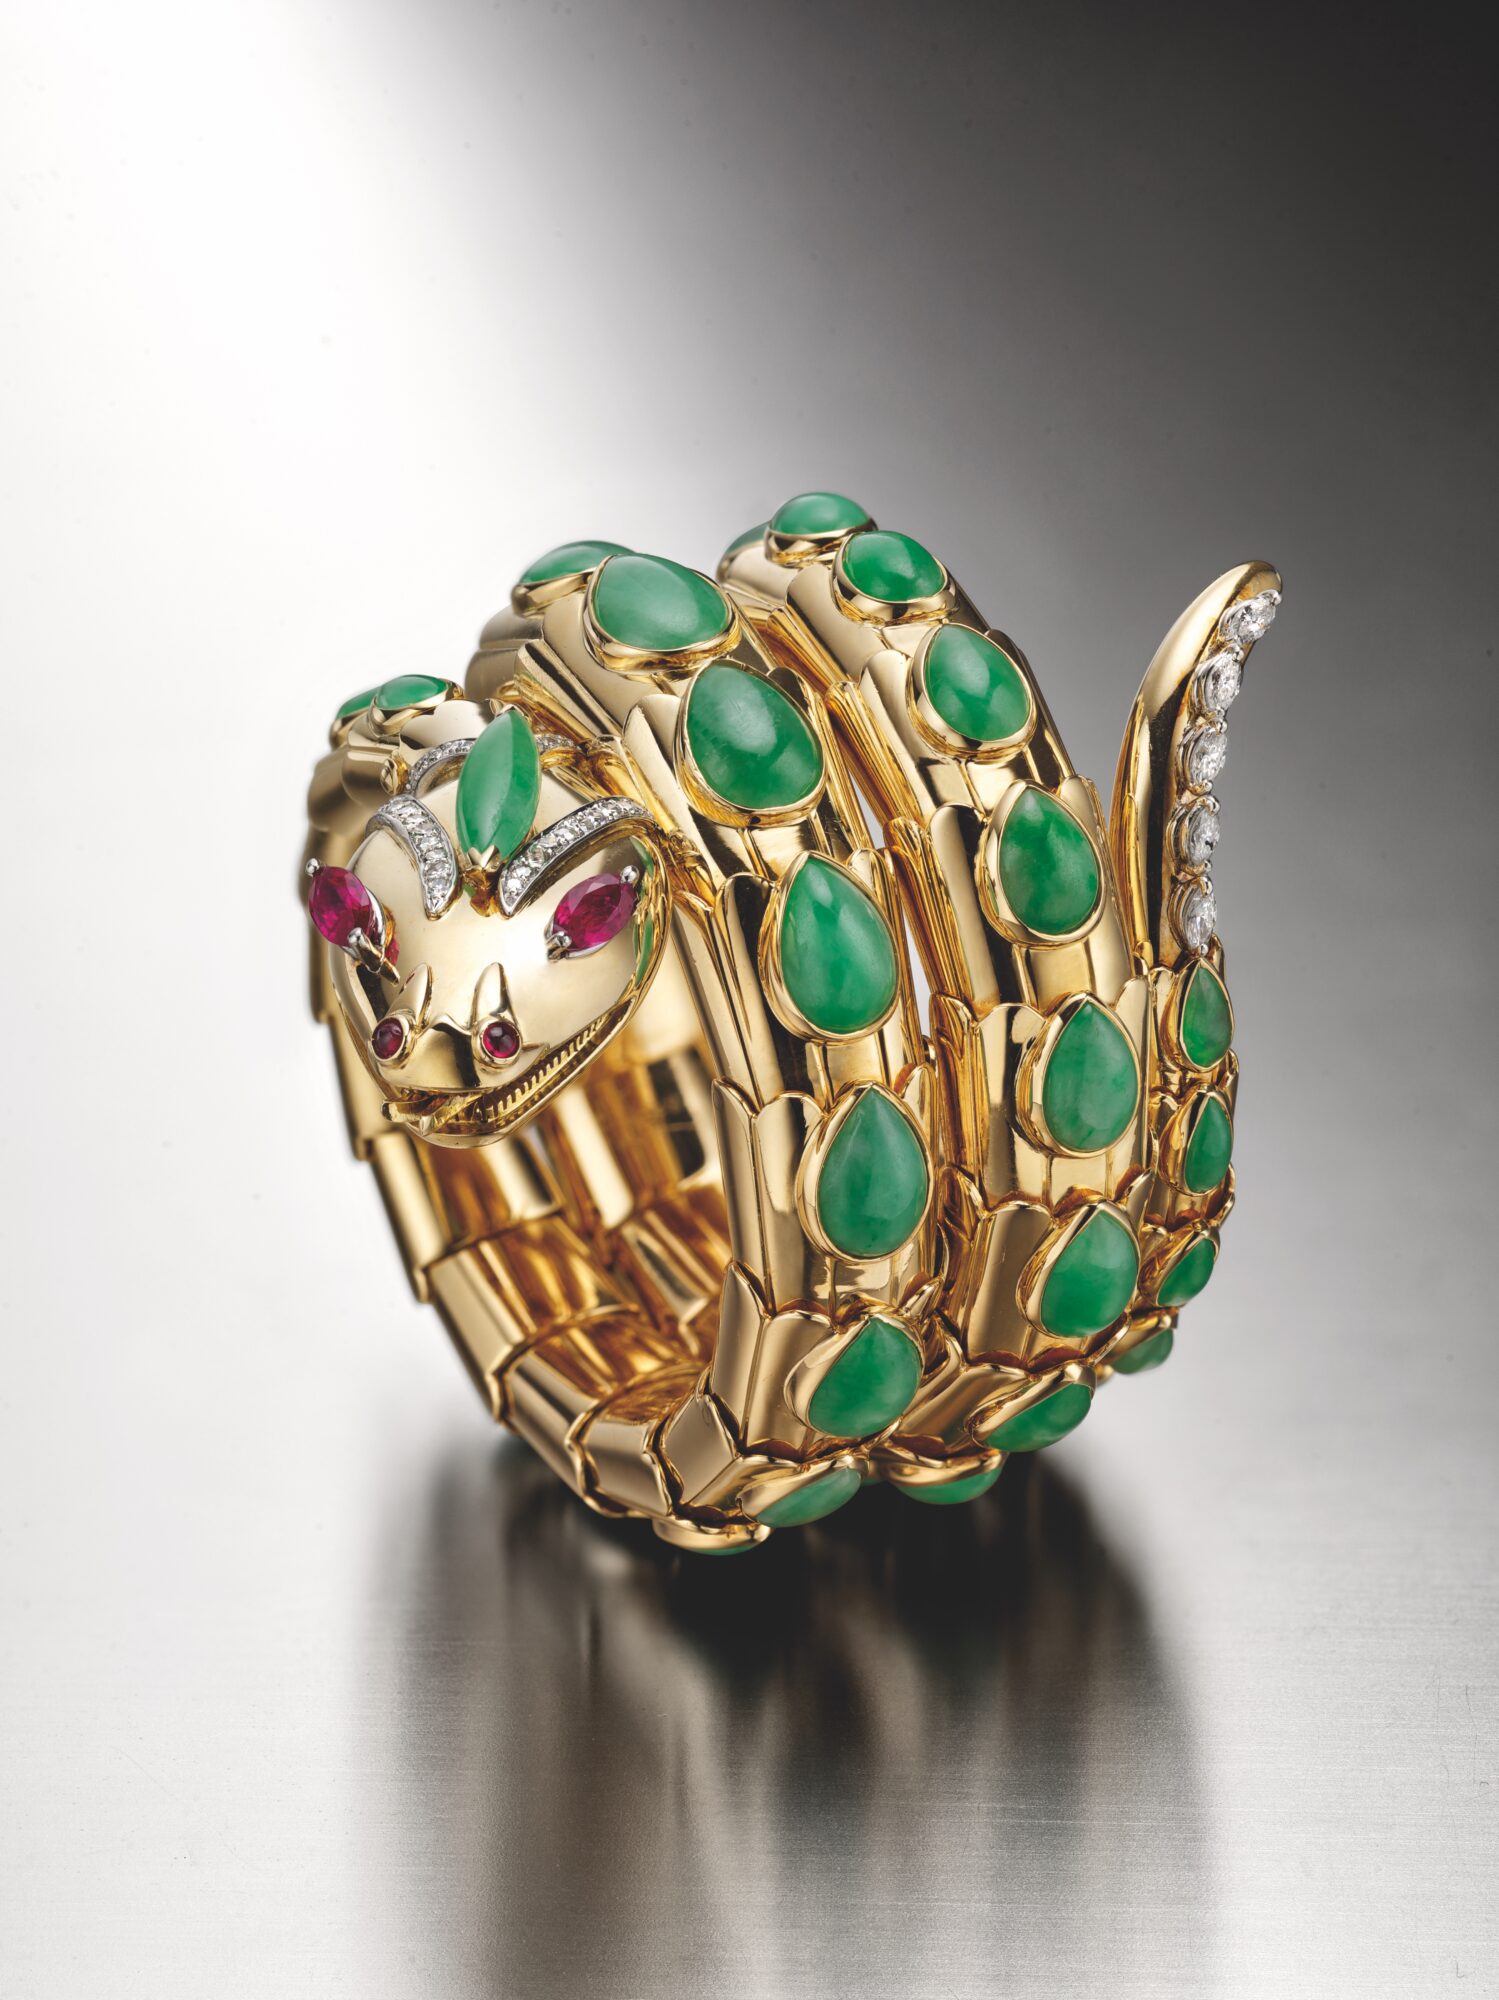 Snake bracelet in gold with jade, rubies and diamonds, 1968. Photo credit: Studio Orizzonte